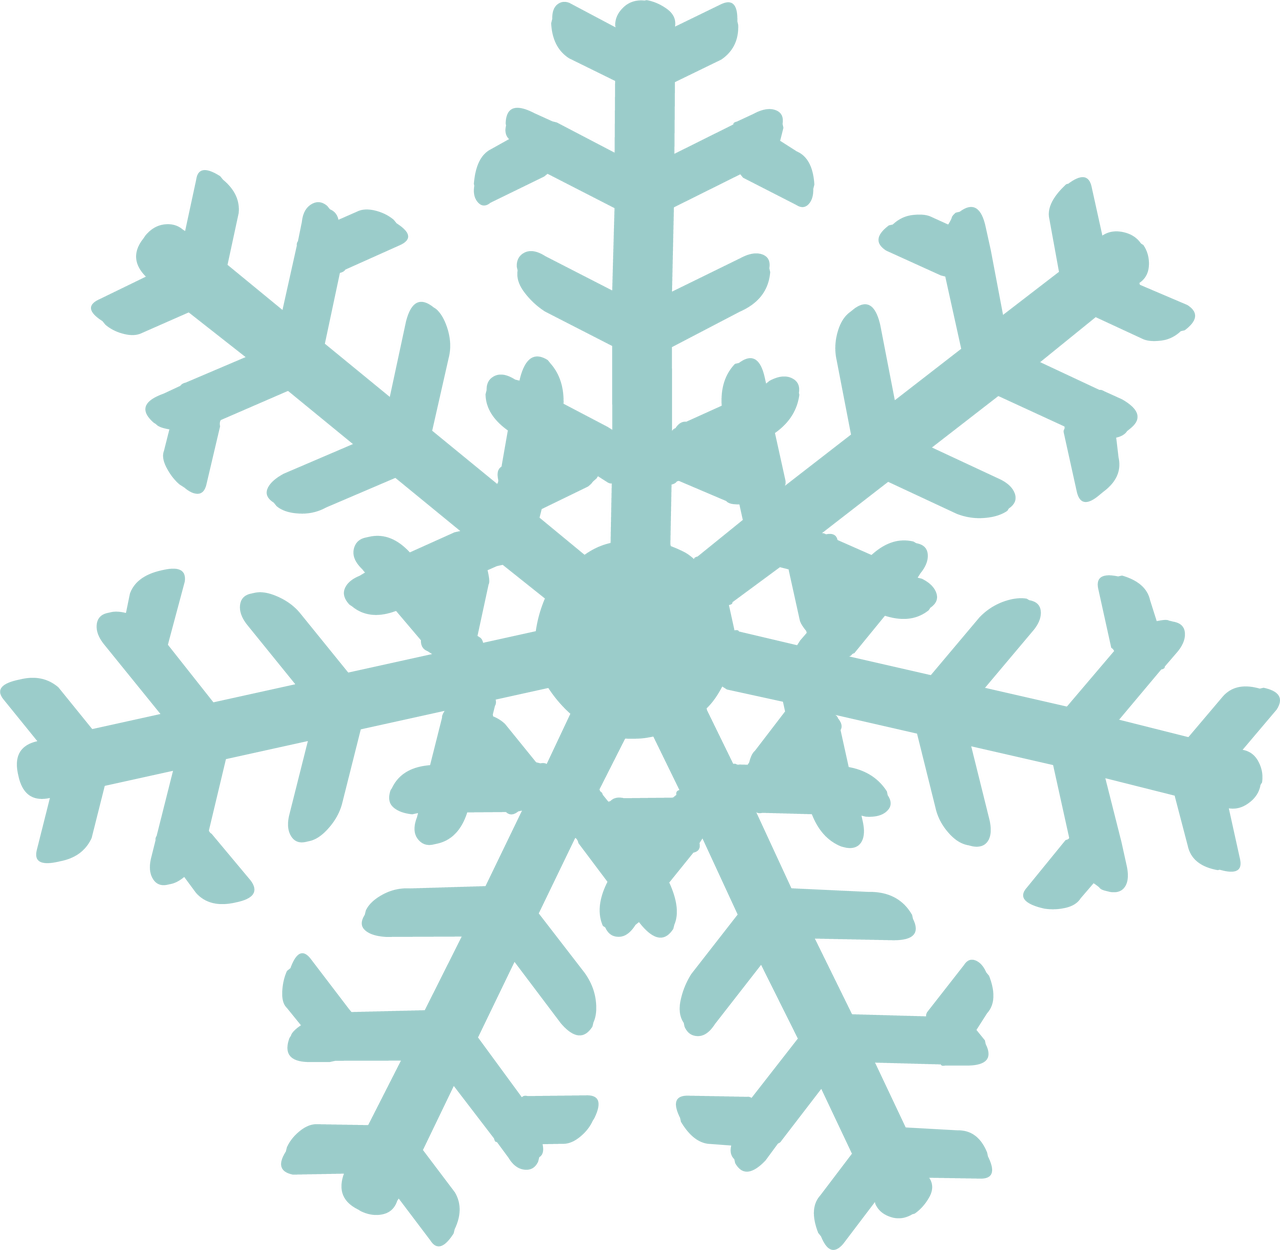 Download Snowflake #7 SVG Cut File - Snap Click Supply Co.